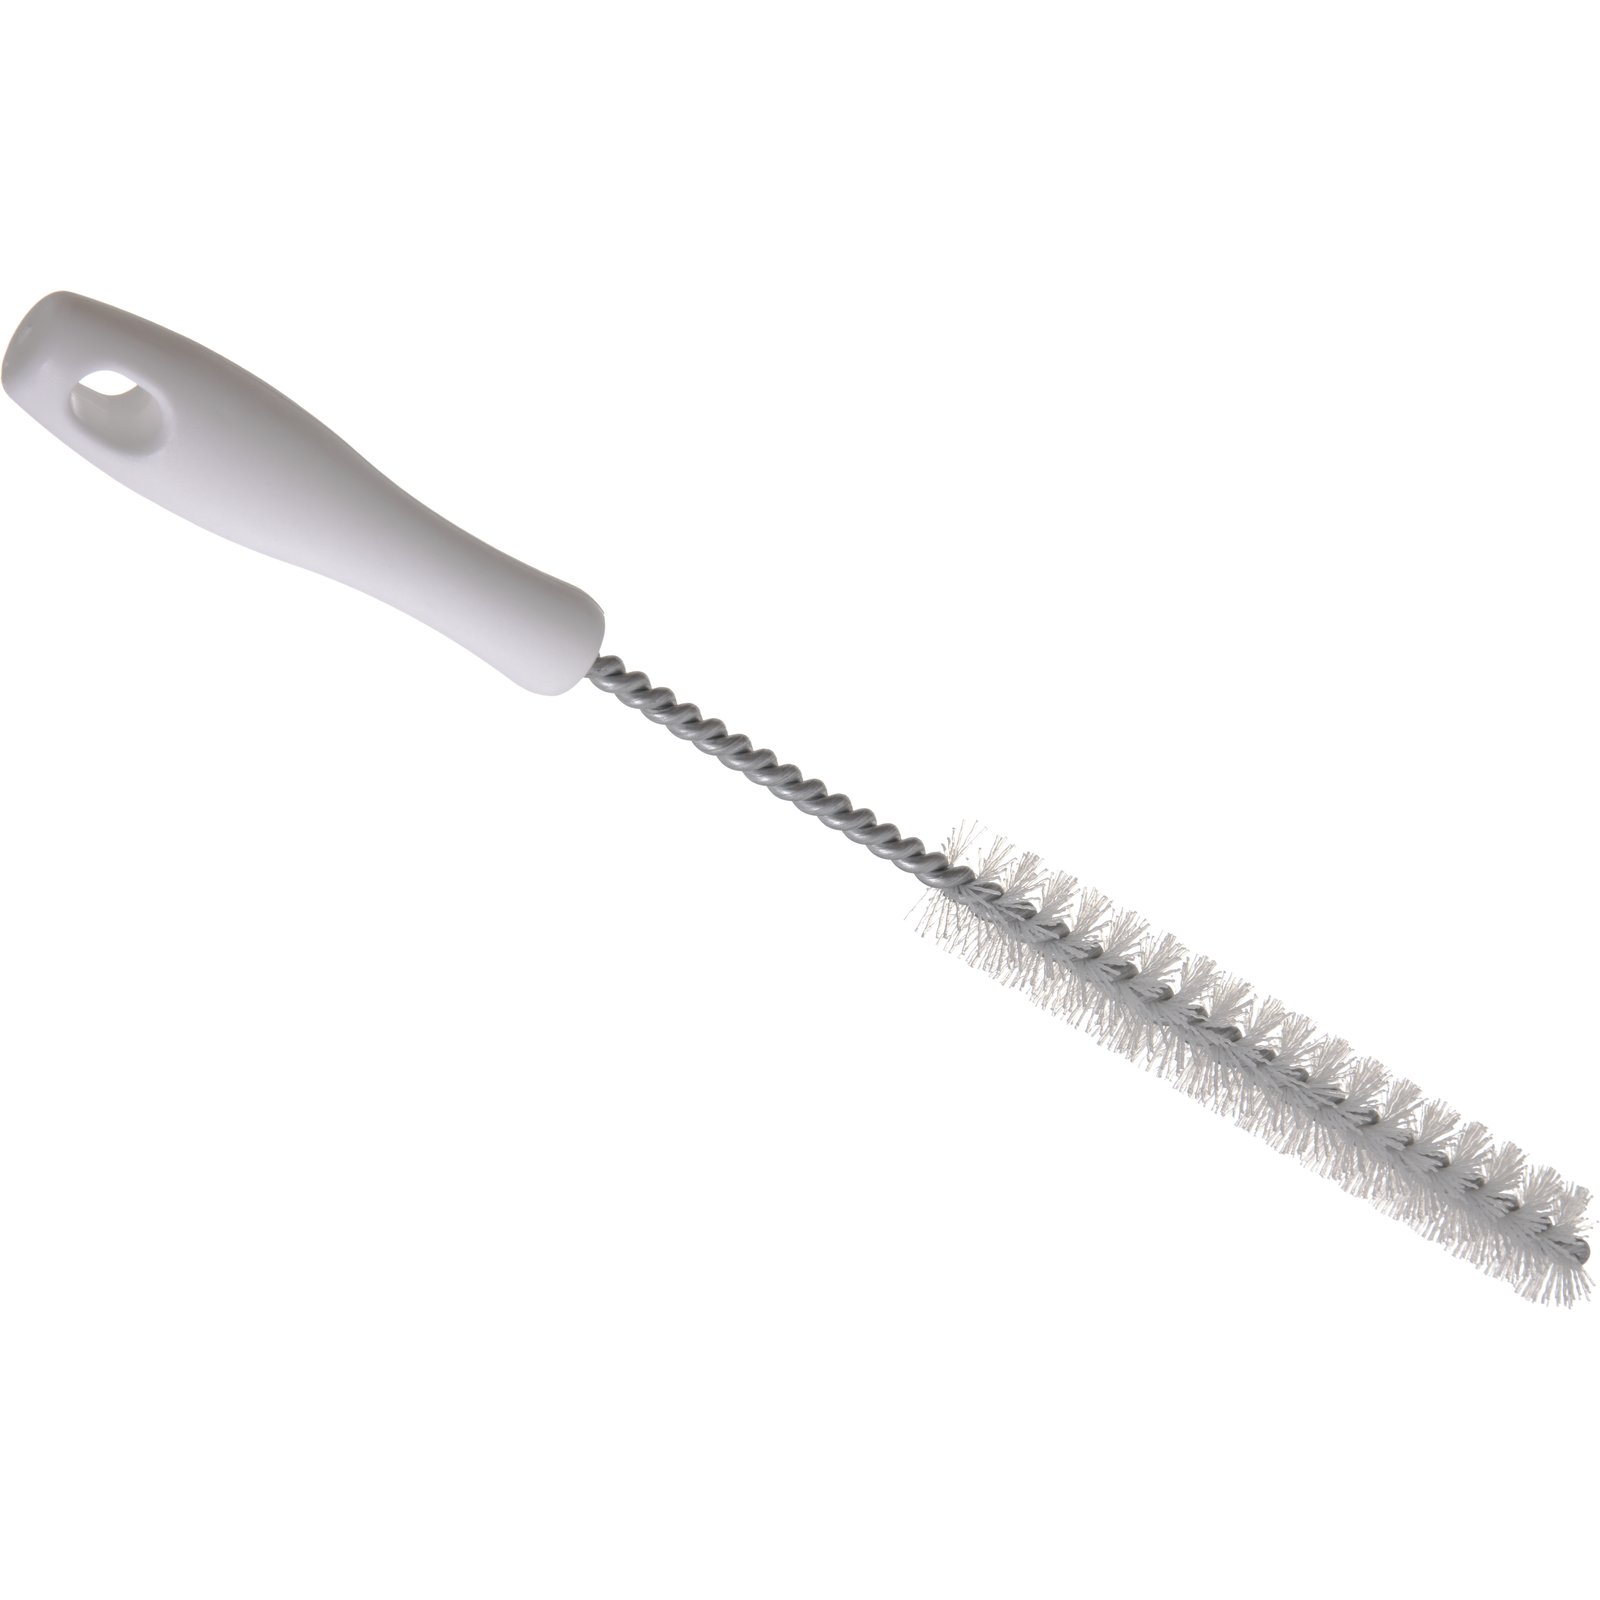 USA MADE Carlisle® Sparta® Spectrum® CIP Clean-In-Place 11.5" White Hook Brush 